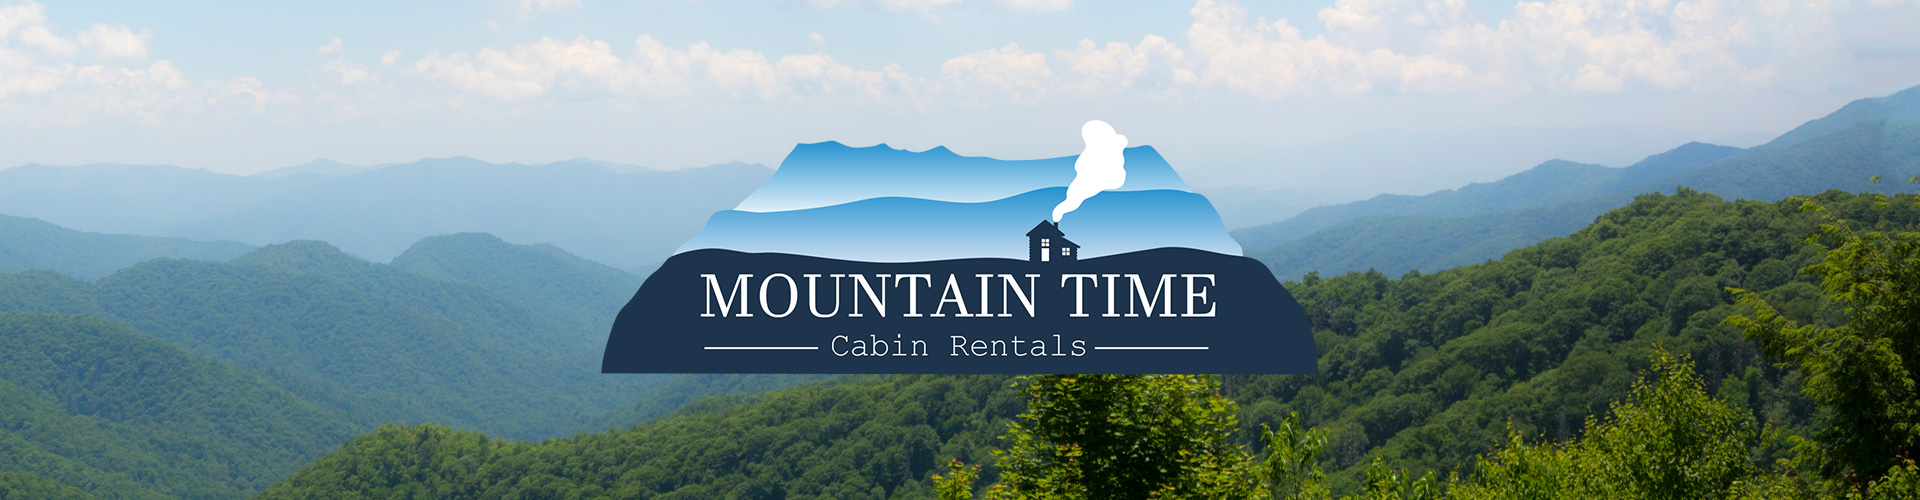 Mountain Time Cabin Rentals Banner